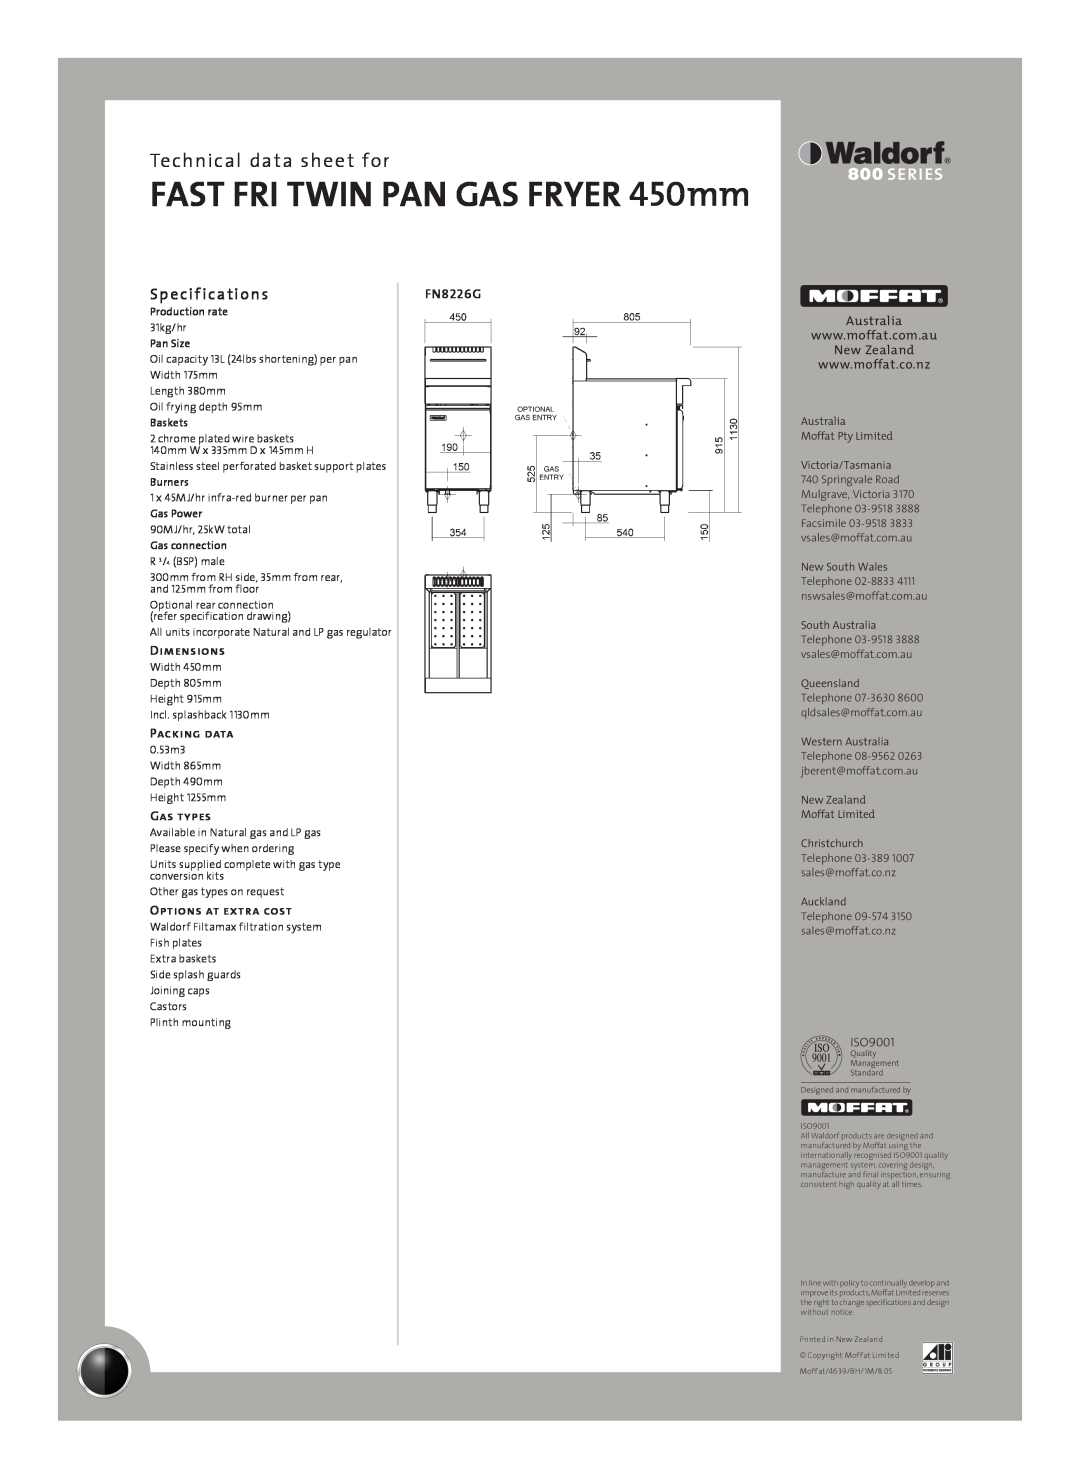 Moffat FN8226GE Sp e cif ications, FAST FRI TWIN PAN GAS FRYER 450mm, Technical data sheet for, Dimensions, Packing data 